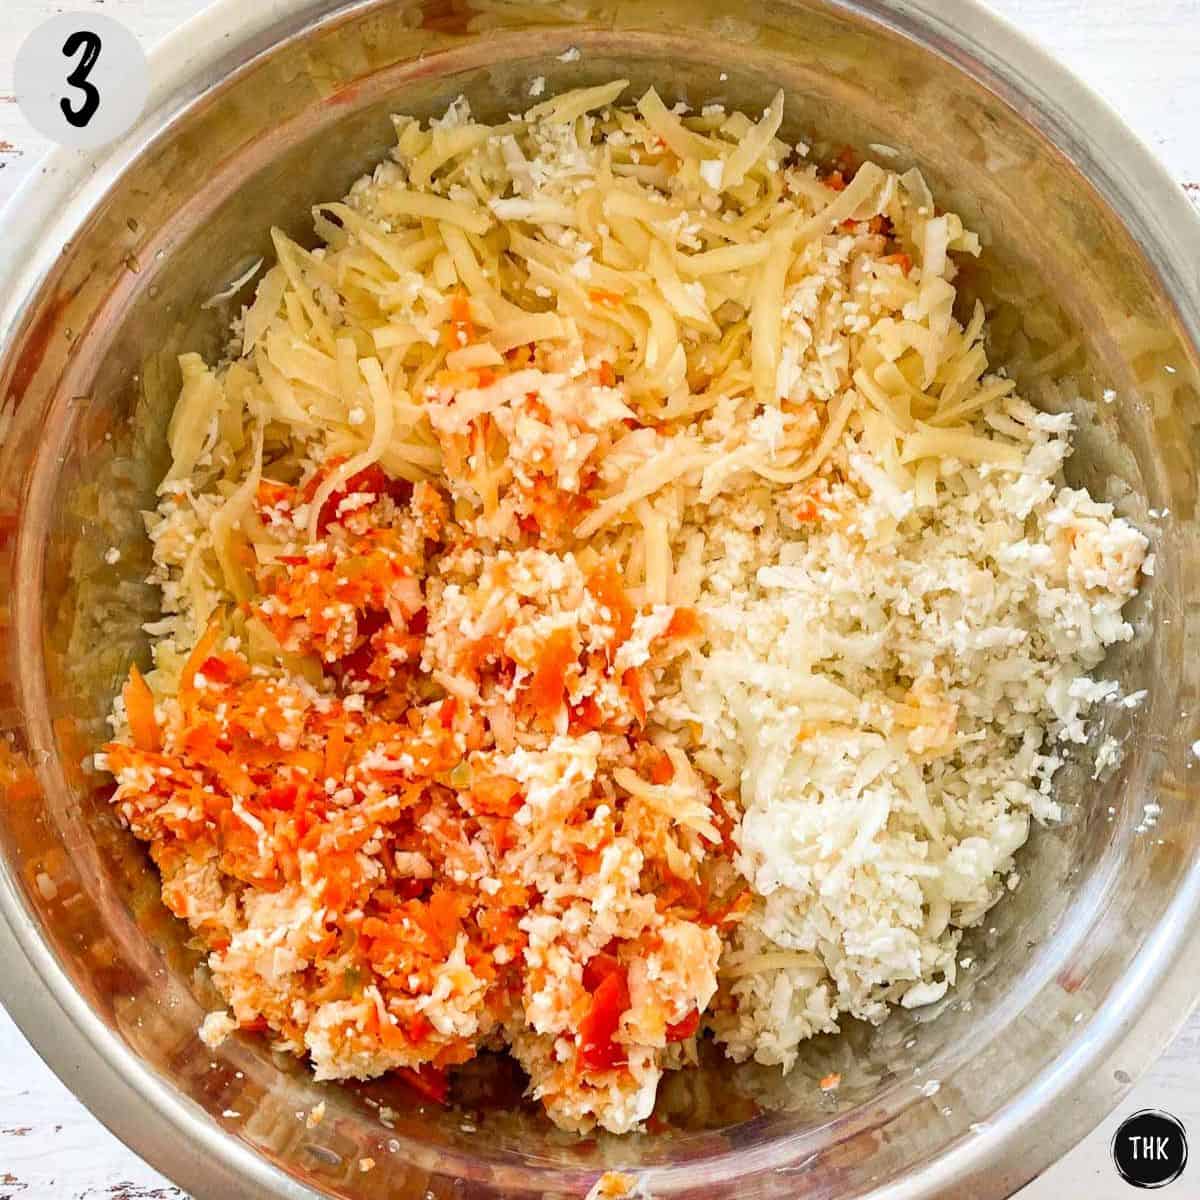 Shredded potatoes, cauliflower, sliced peppers and onions inside large mixing bowl.